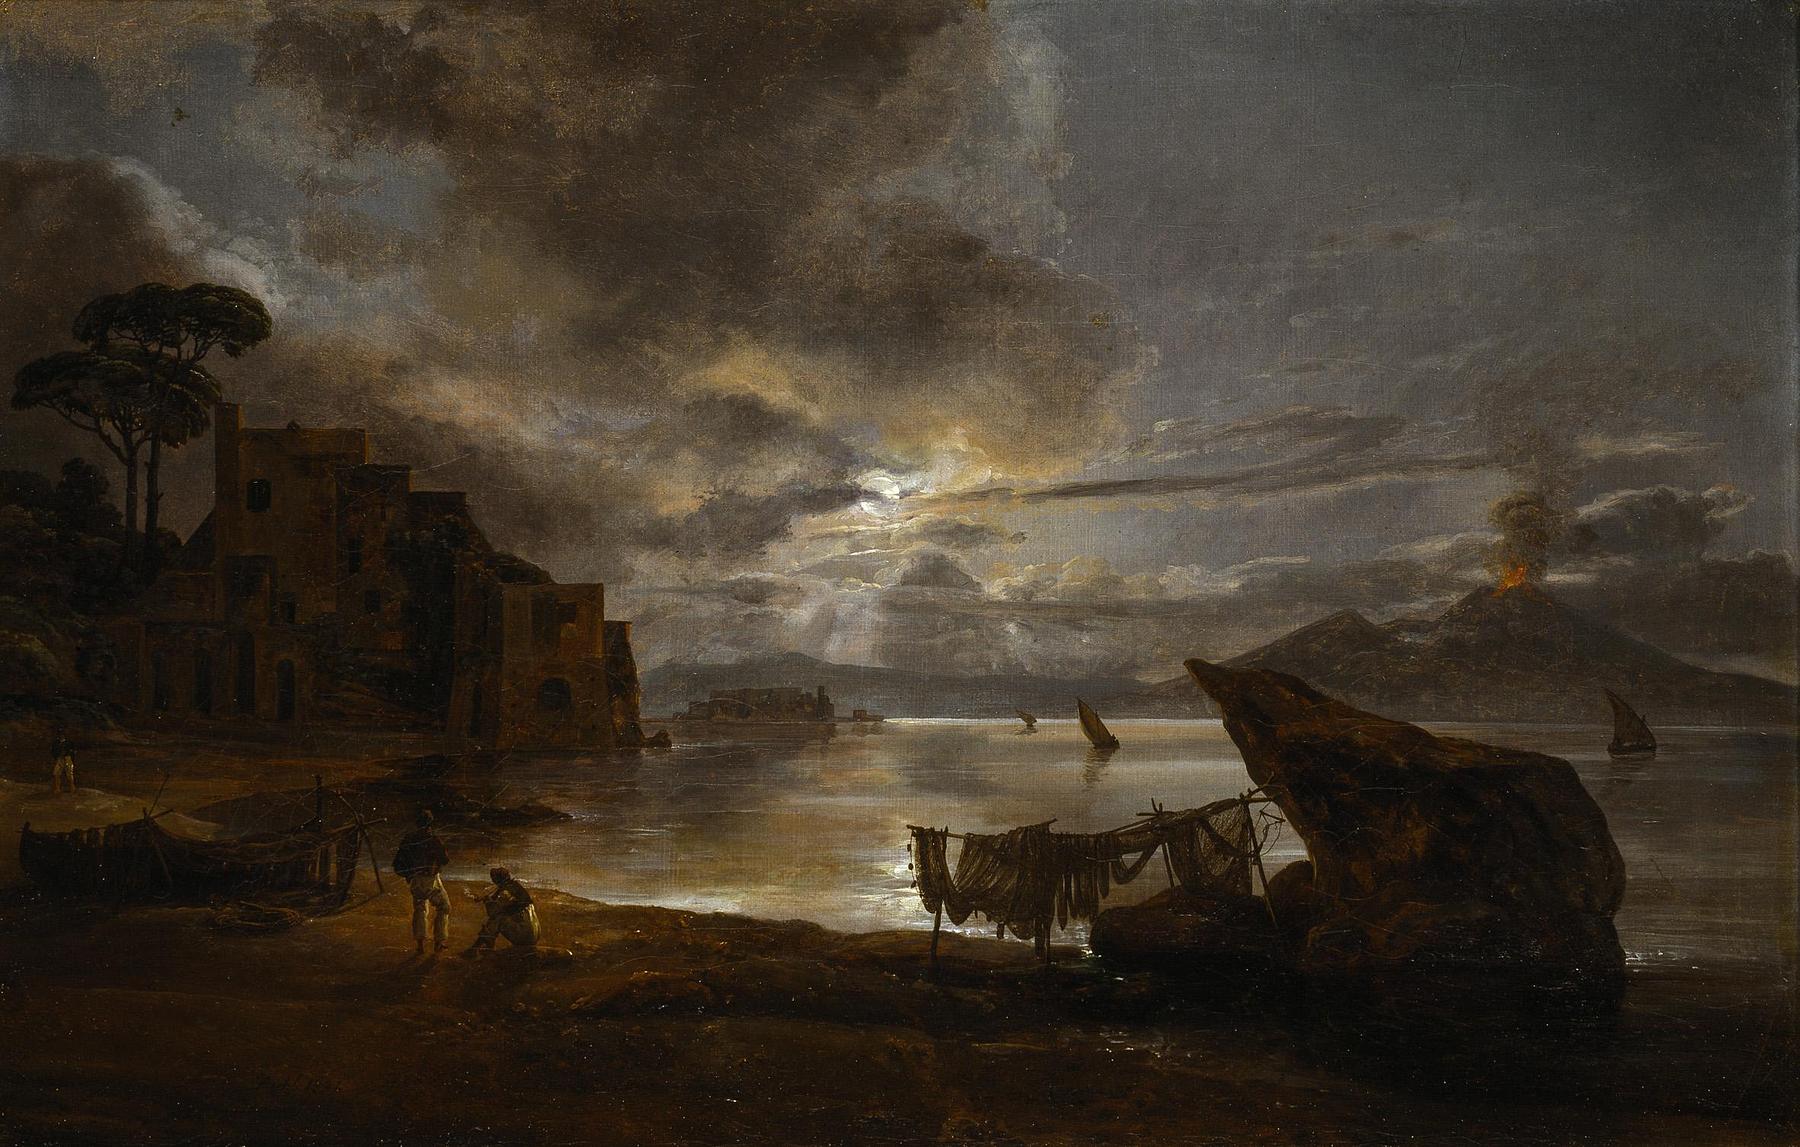 The Bay of Naples by Moonlight and Vesuvius in Eruption, B177